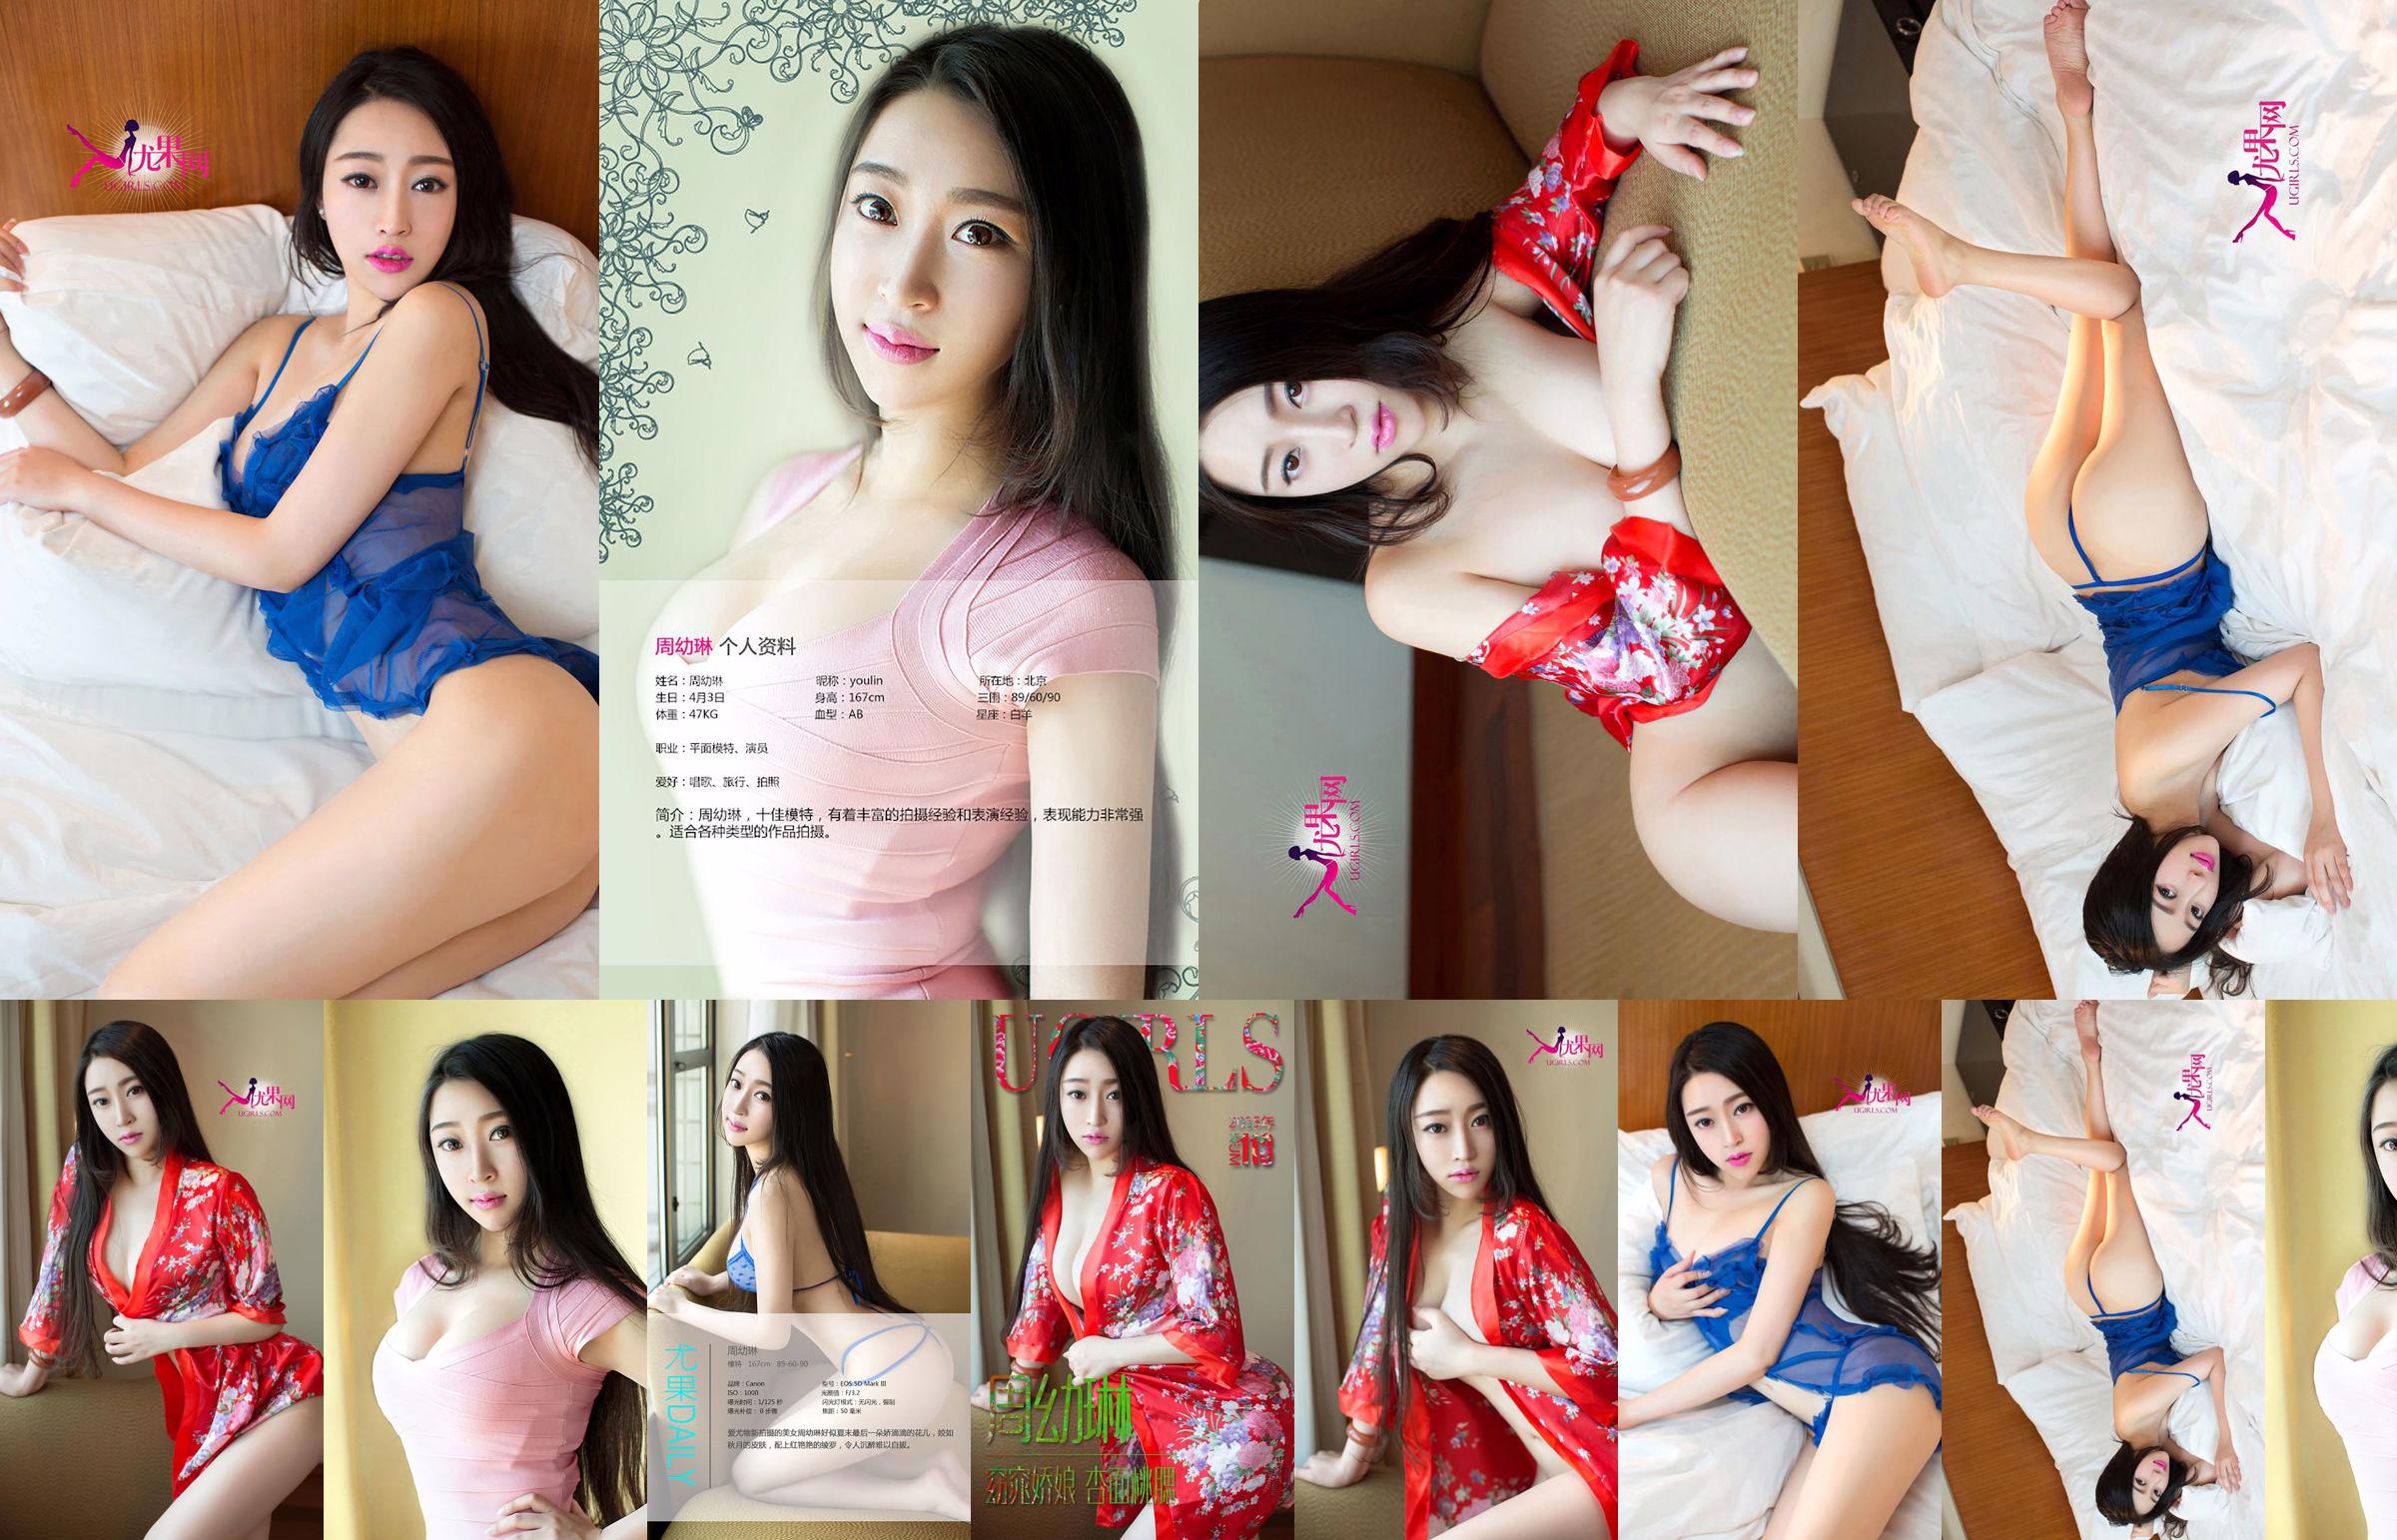 Zhou Youlin "A Beautiful Girl with Apricot Face and Peach Cheeks" [Love Youwu Ugirls] No.113 No.74a4c3 หน้า 3